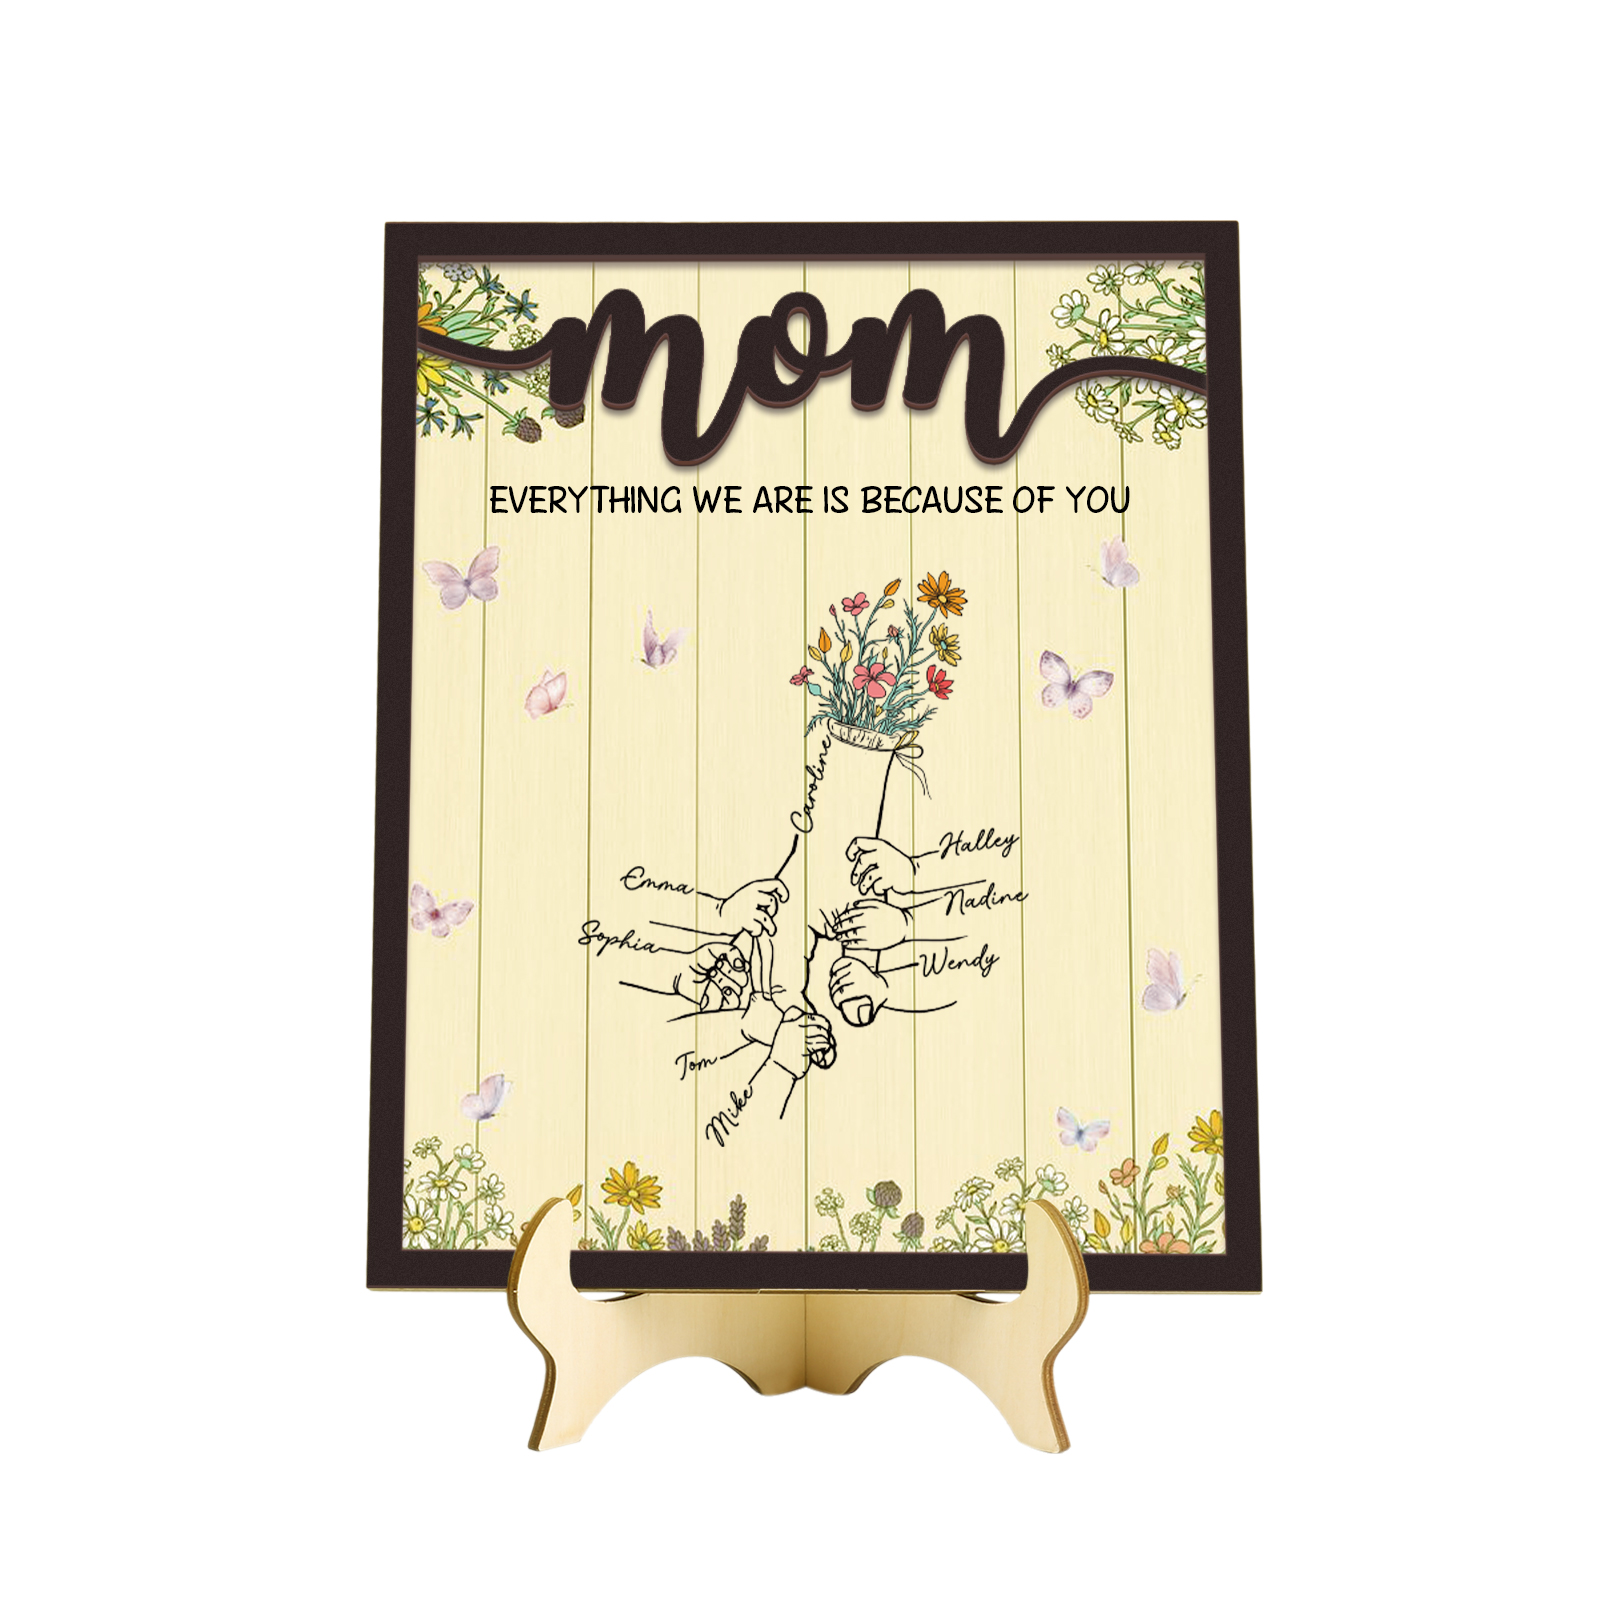 8 Names - Personalized Customizable Text Home Frame Wooden Ornament Holding Hands Flower Elements Style Ornament for Mom